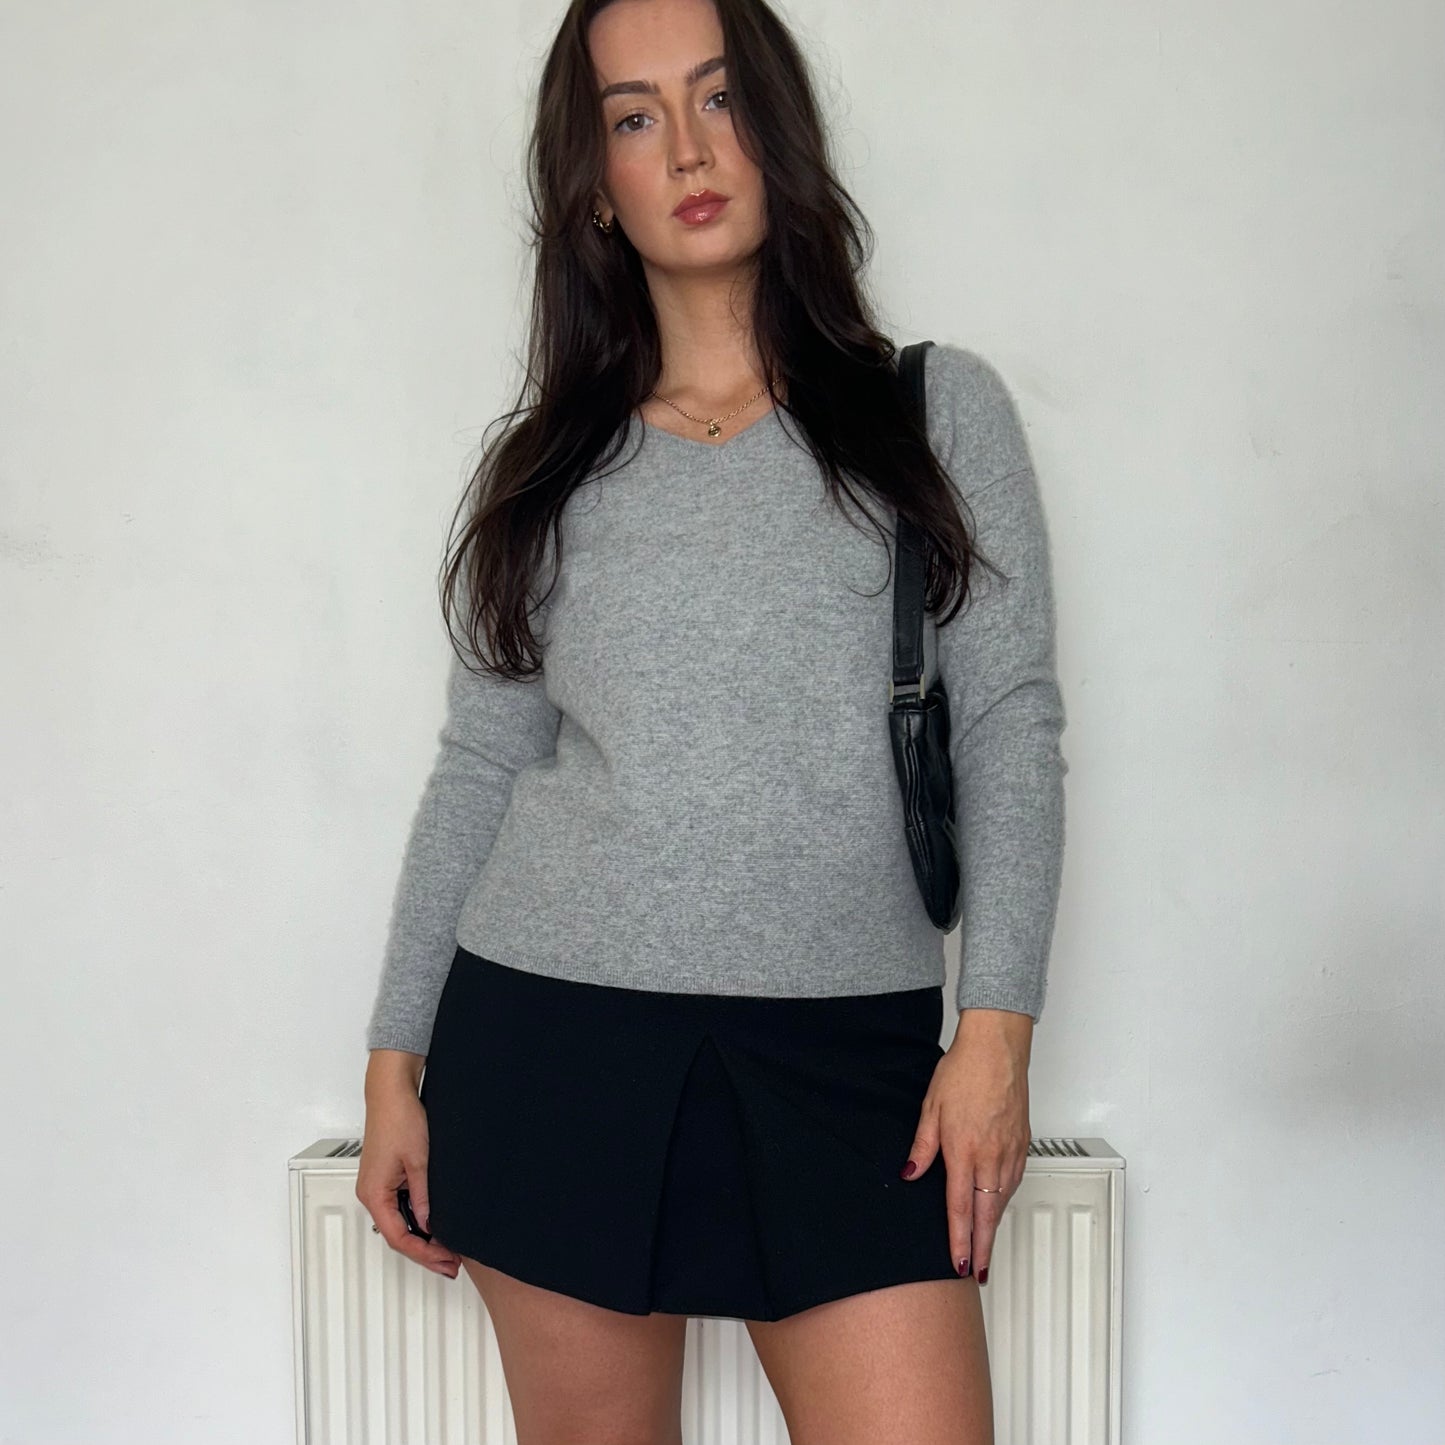 grey knit jumper shown on a model wearing a black mini skirt with a black bag